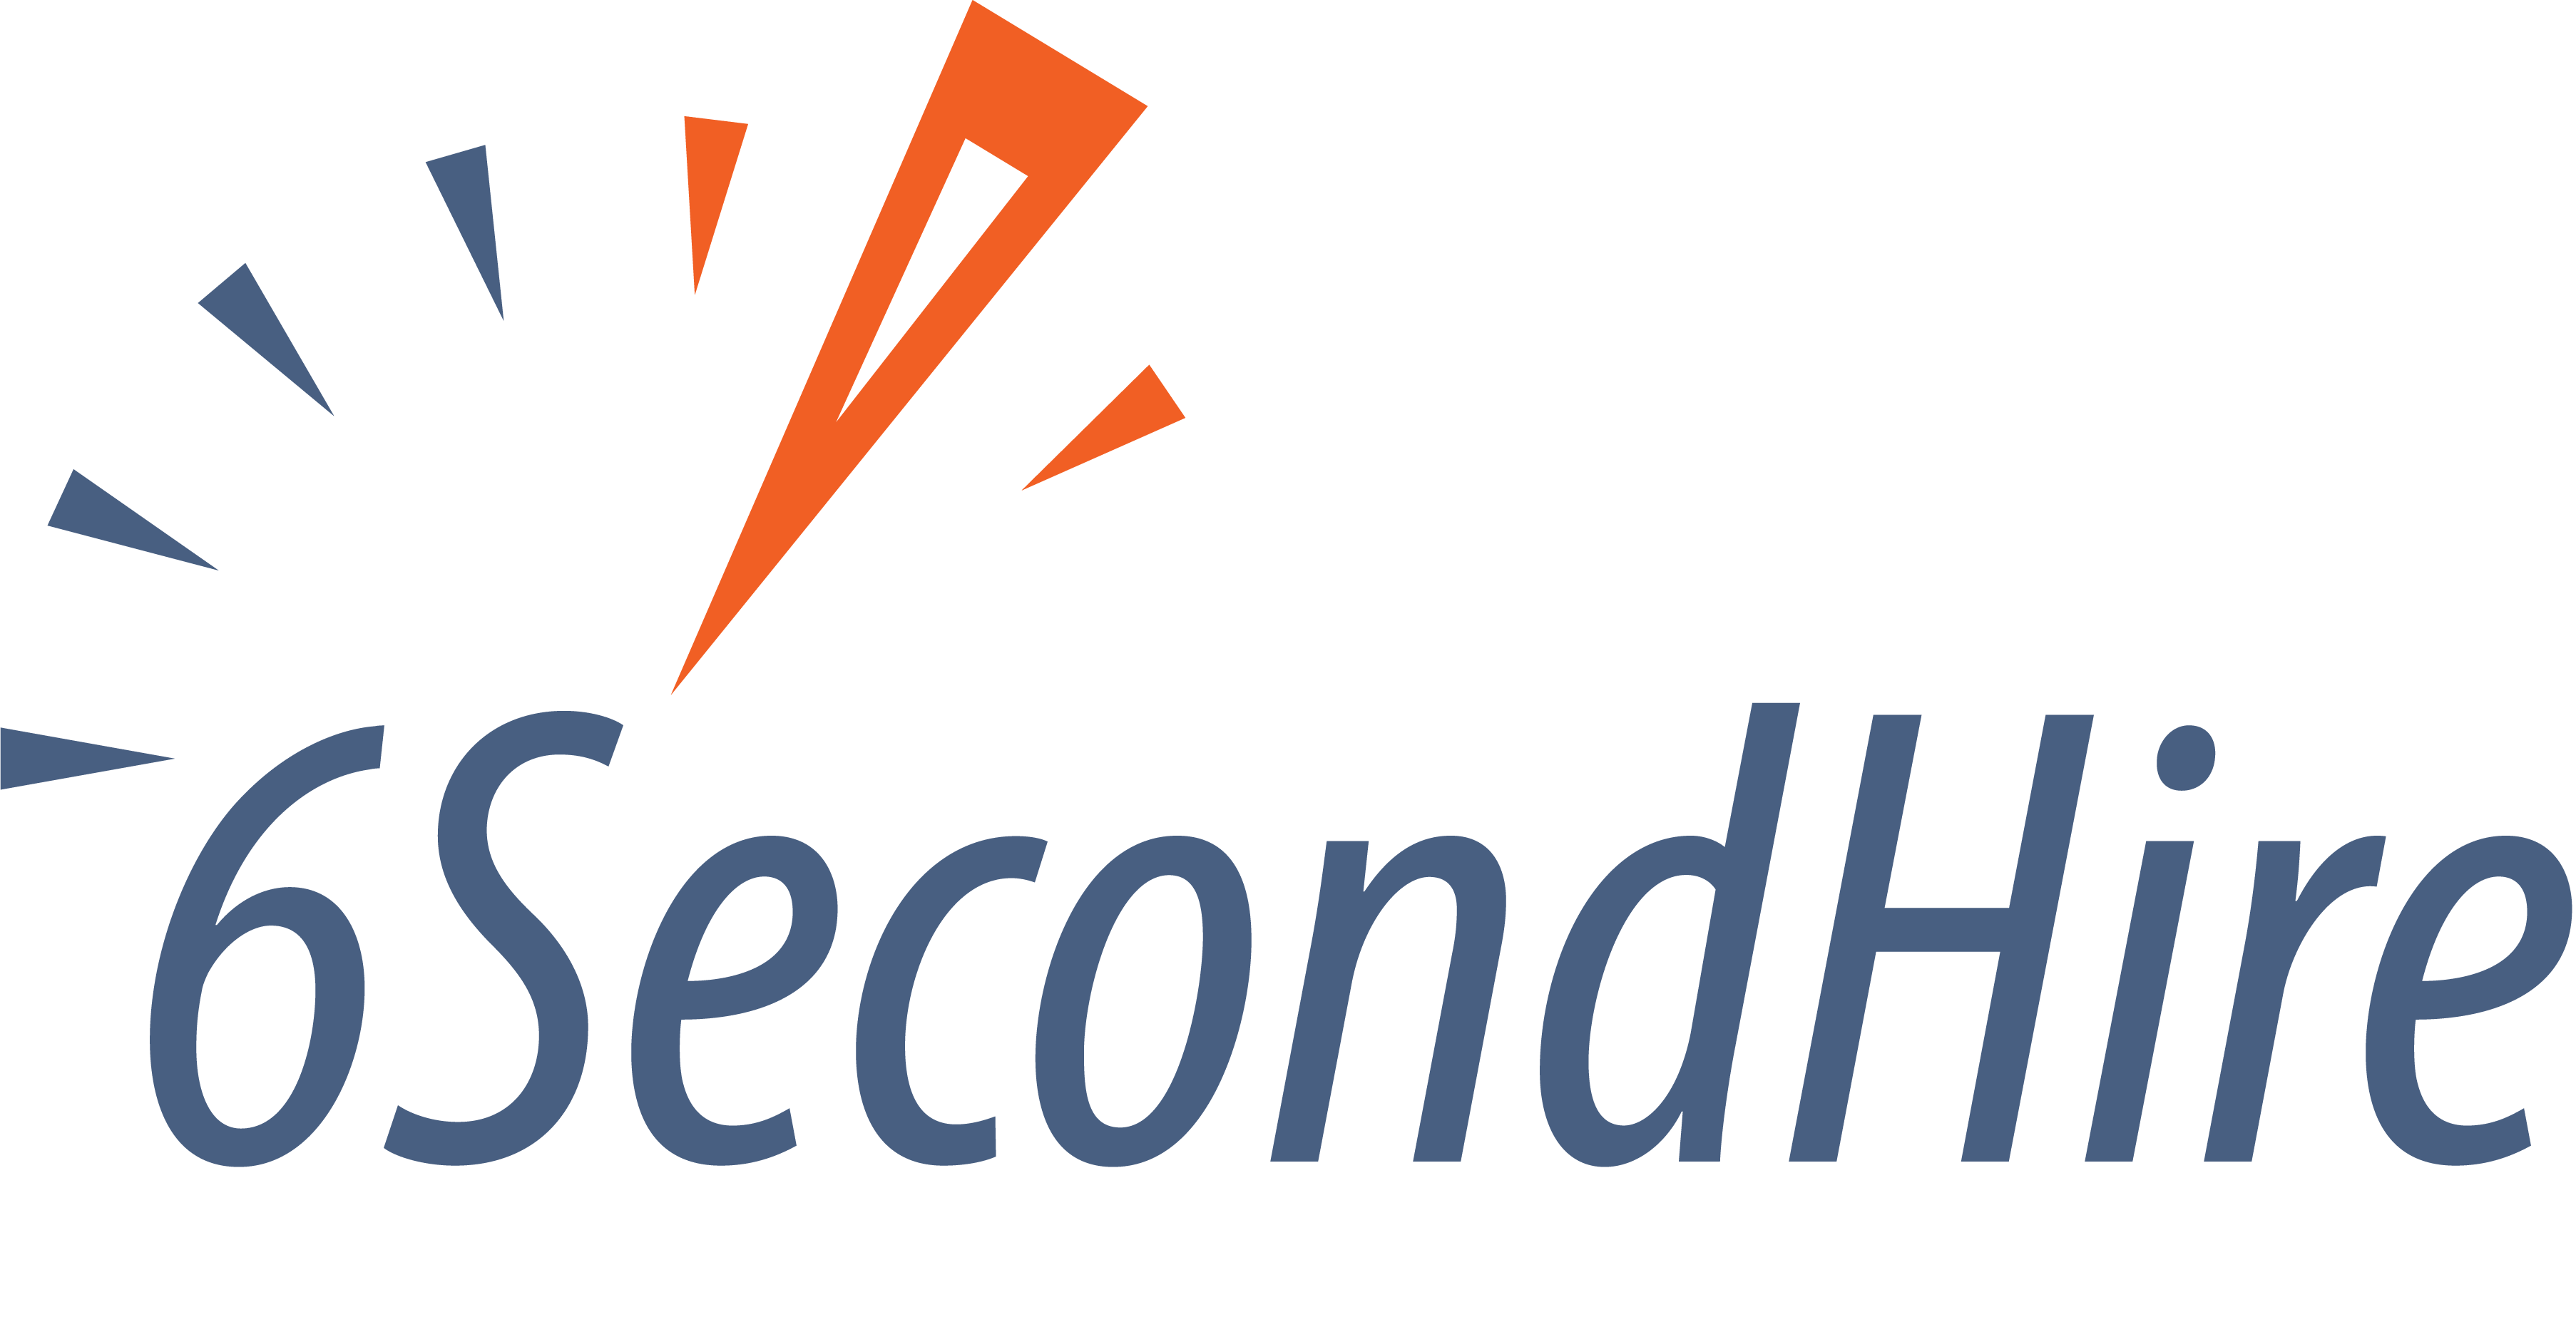 6 Second Hire